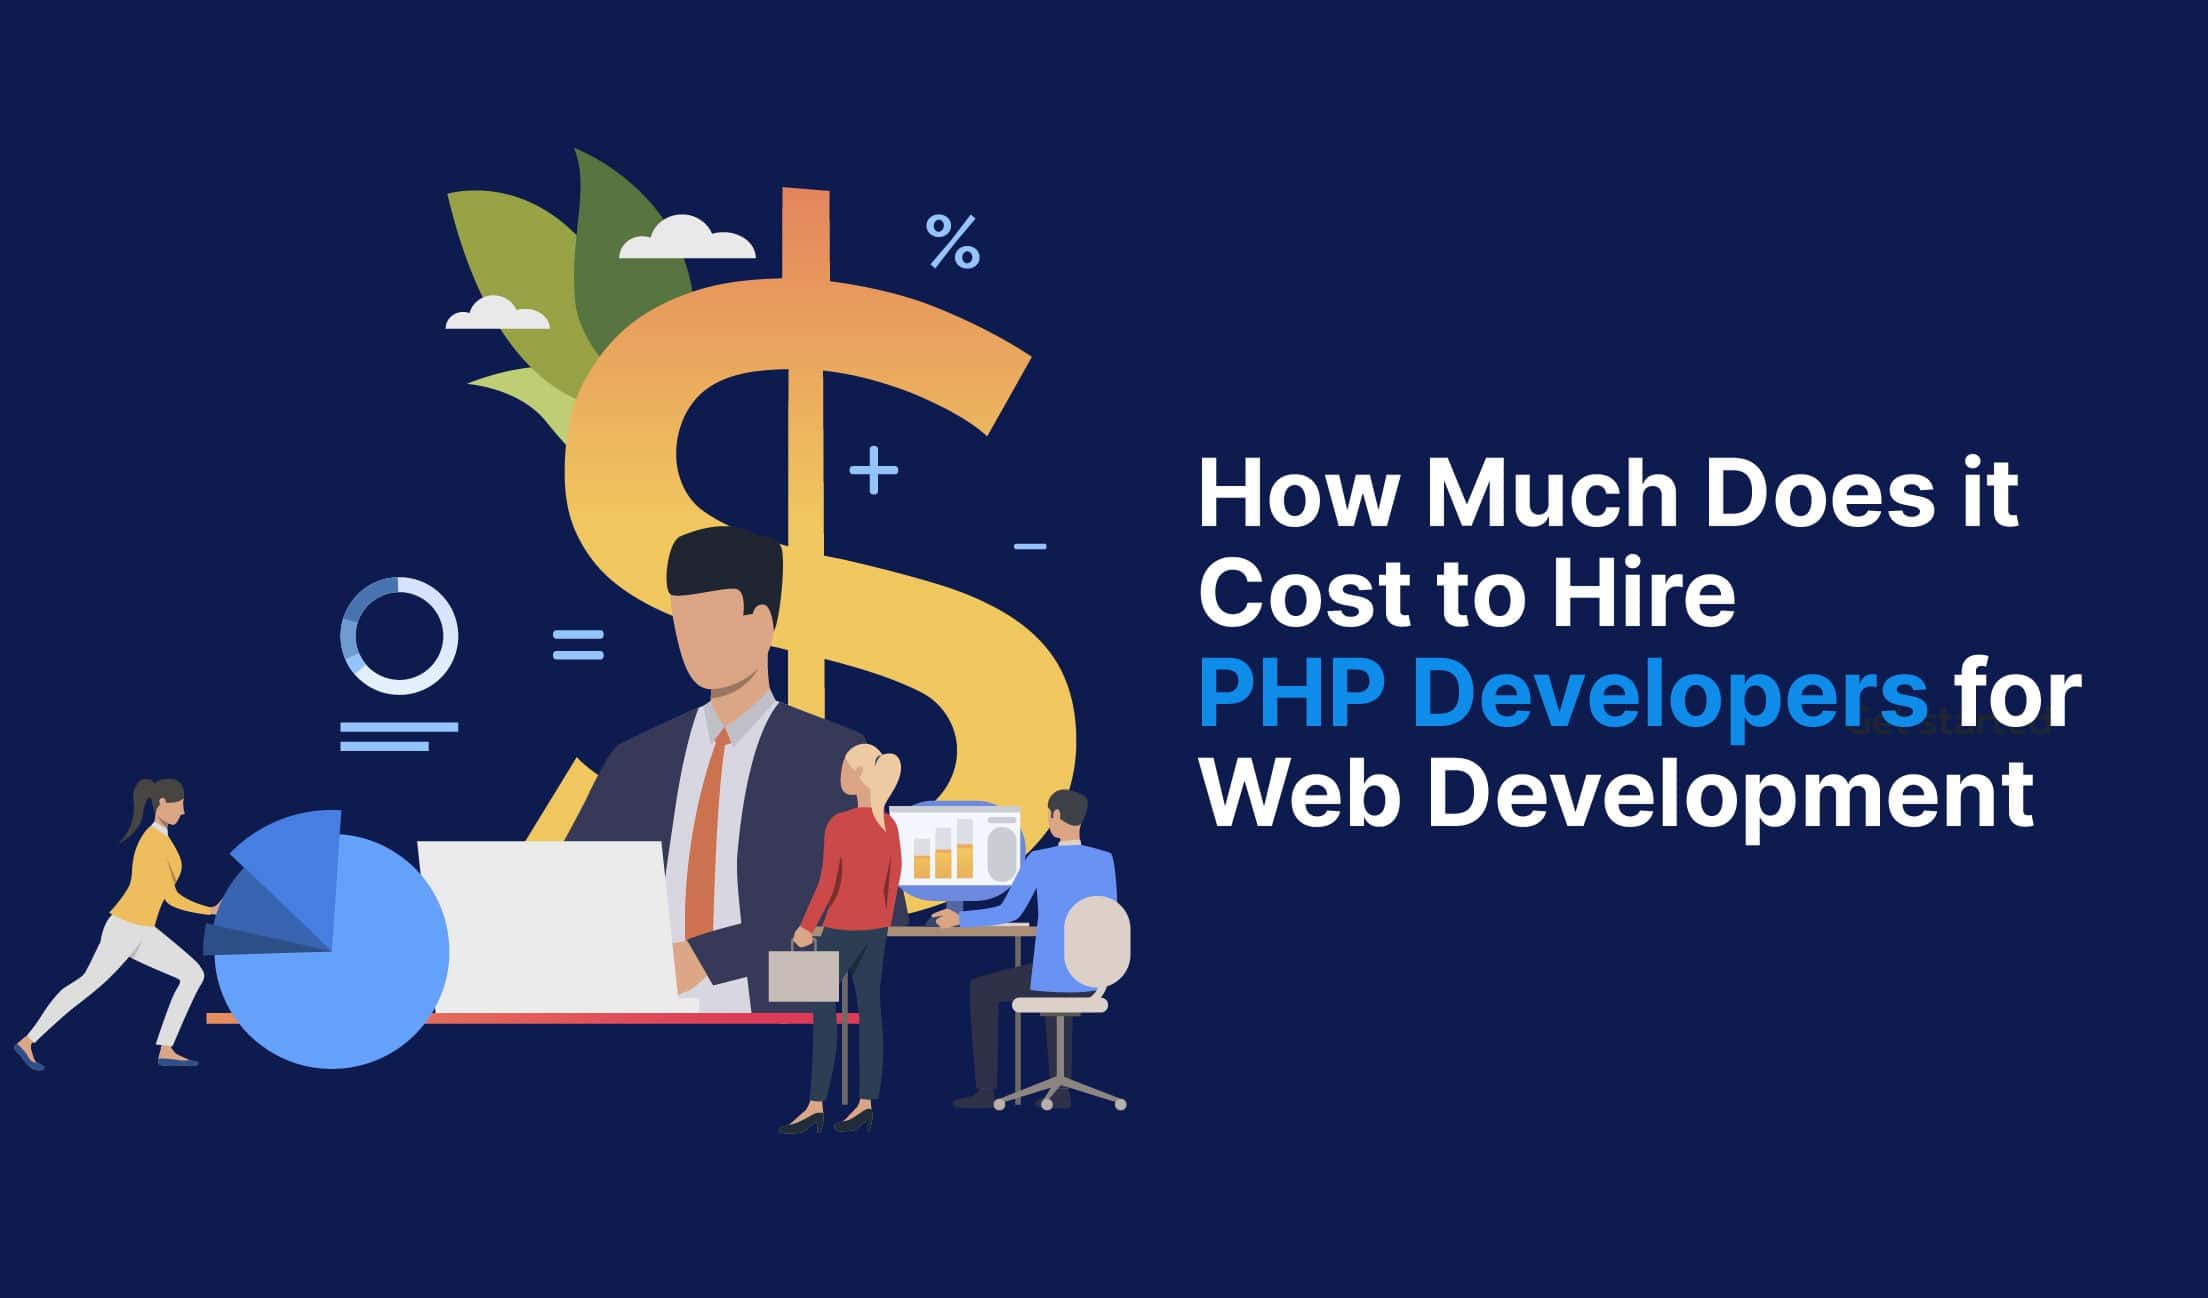 How Much Does It Cost to Hire PHP Developers for Web Development?